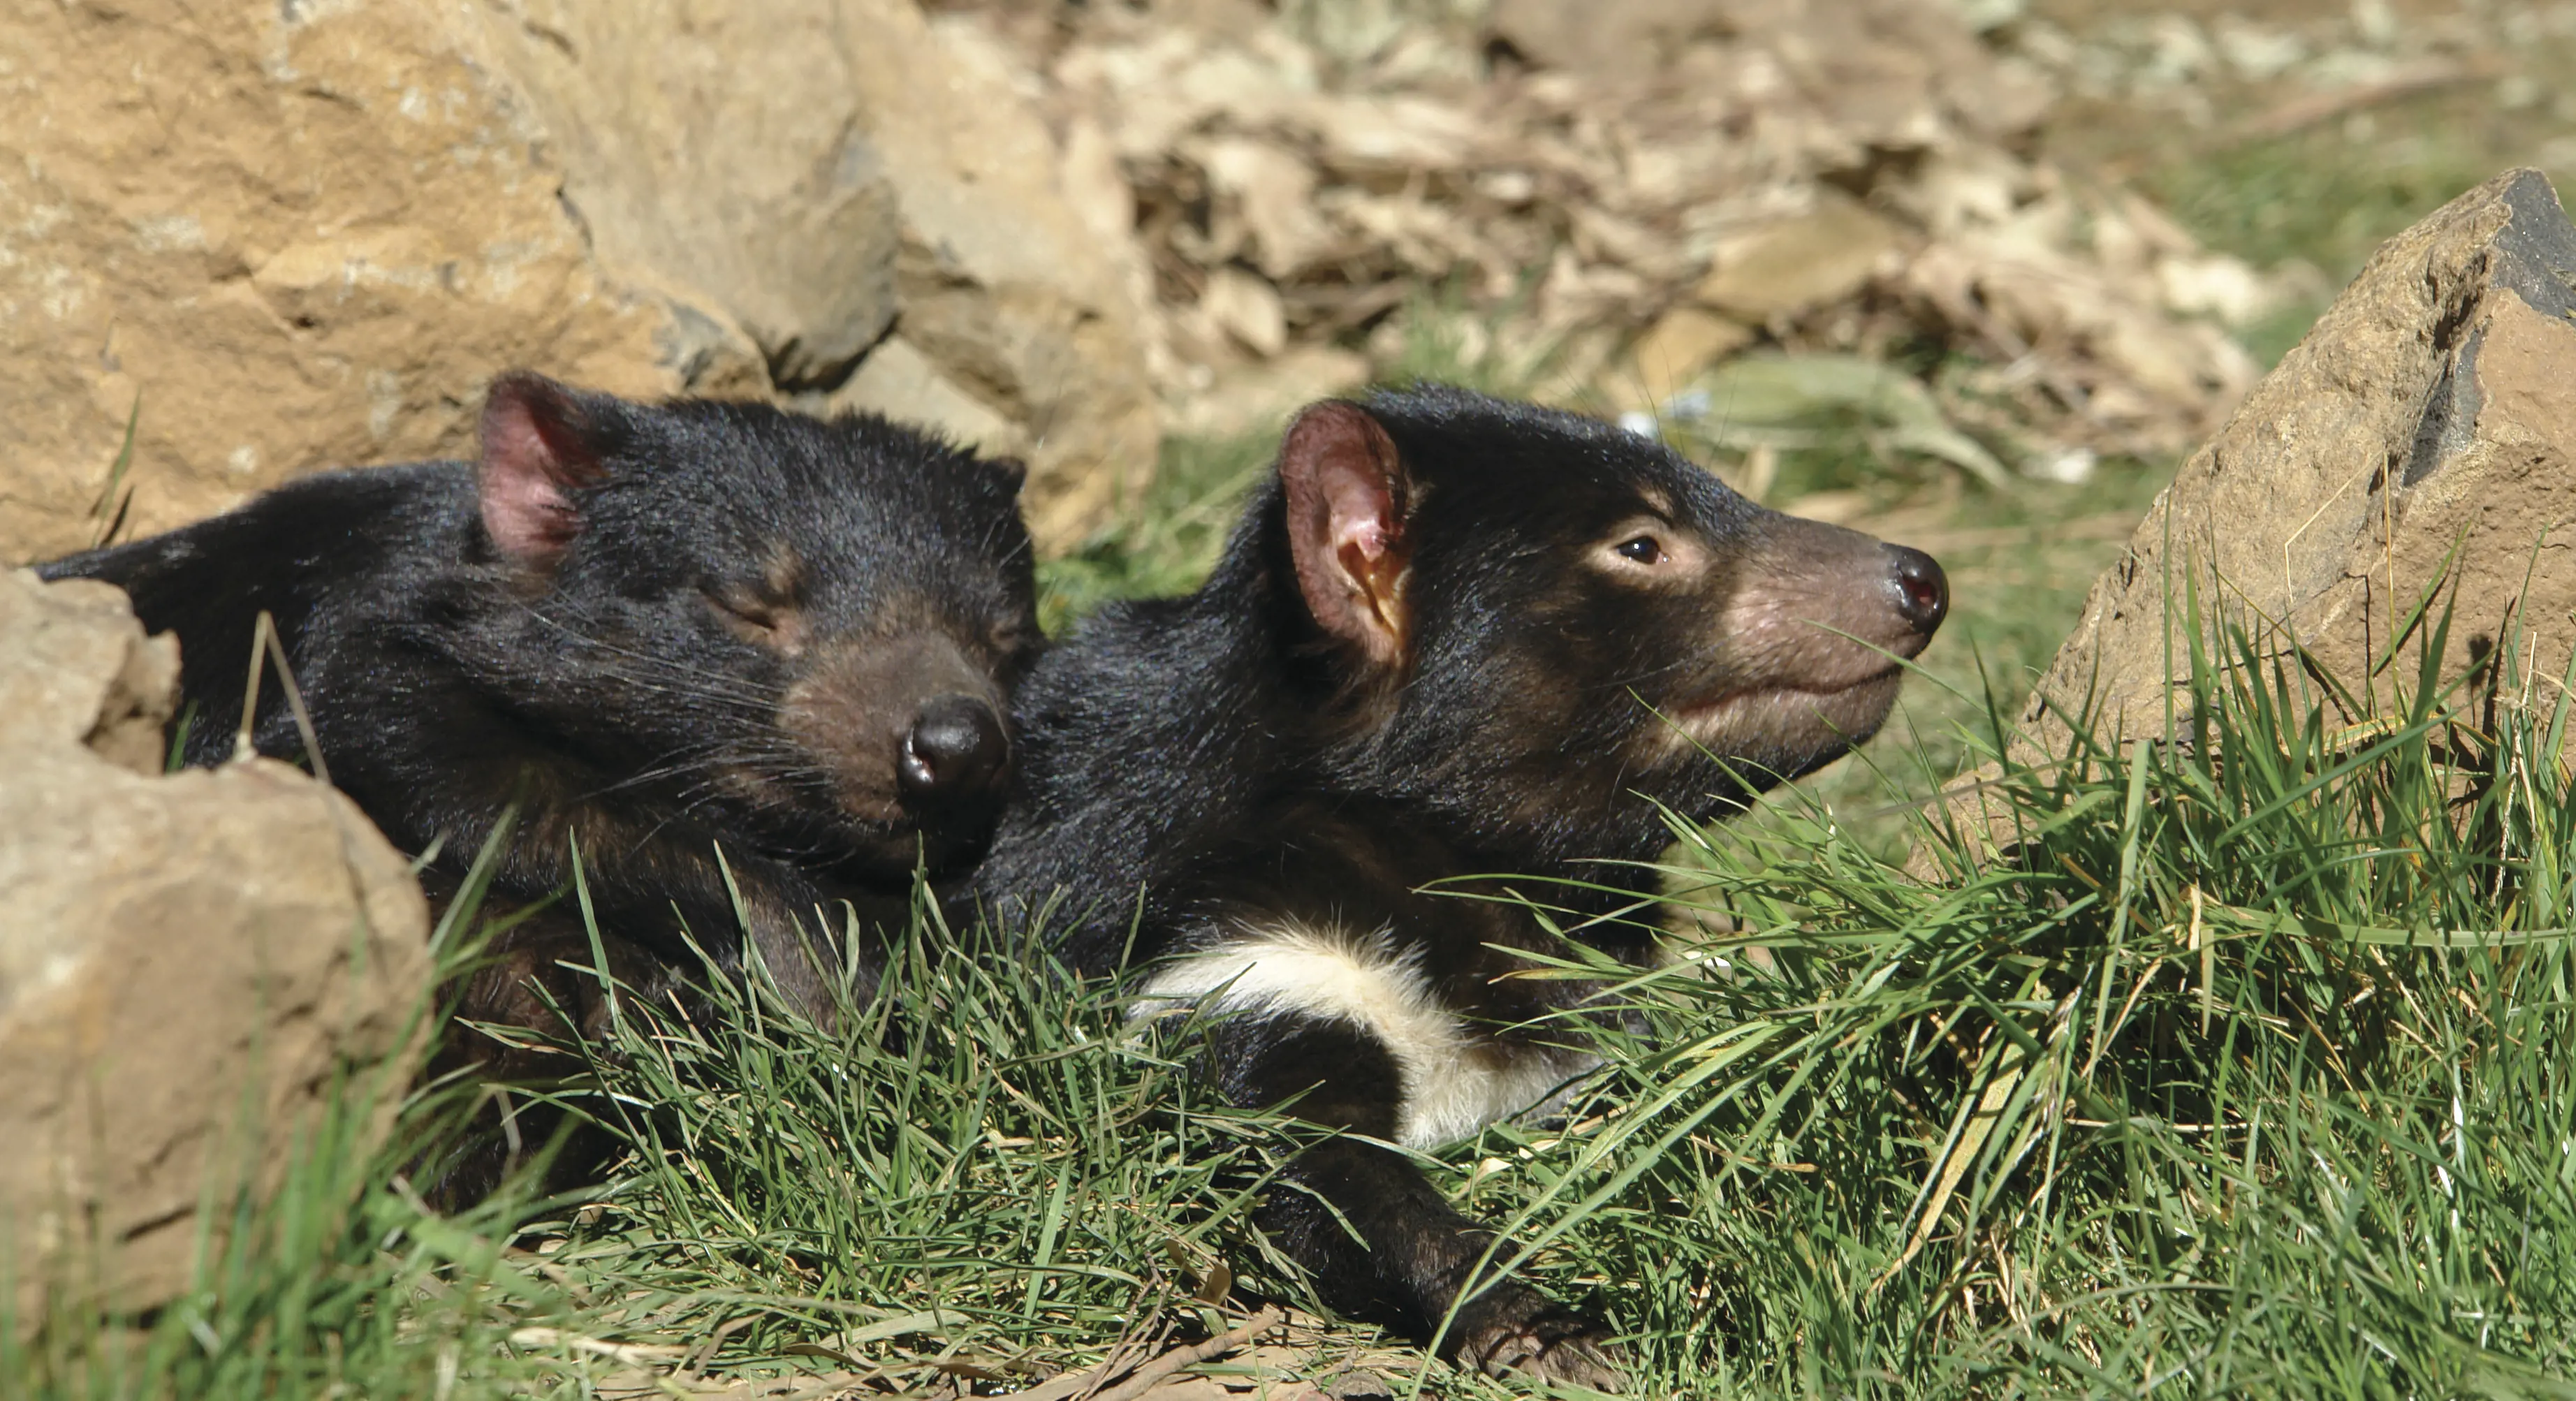 Up close image of two Tasmanian Devils with one sleeping on the other as the other is on lookout.